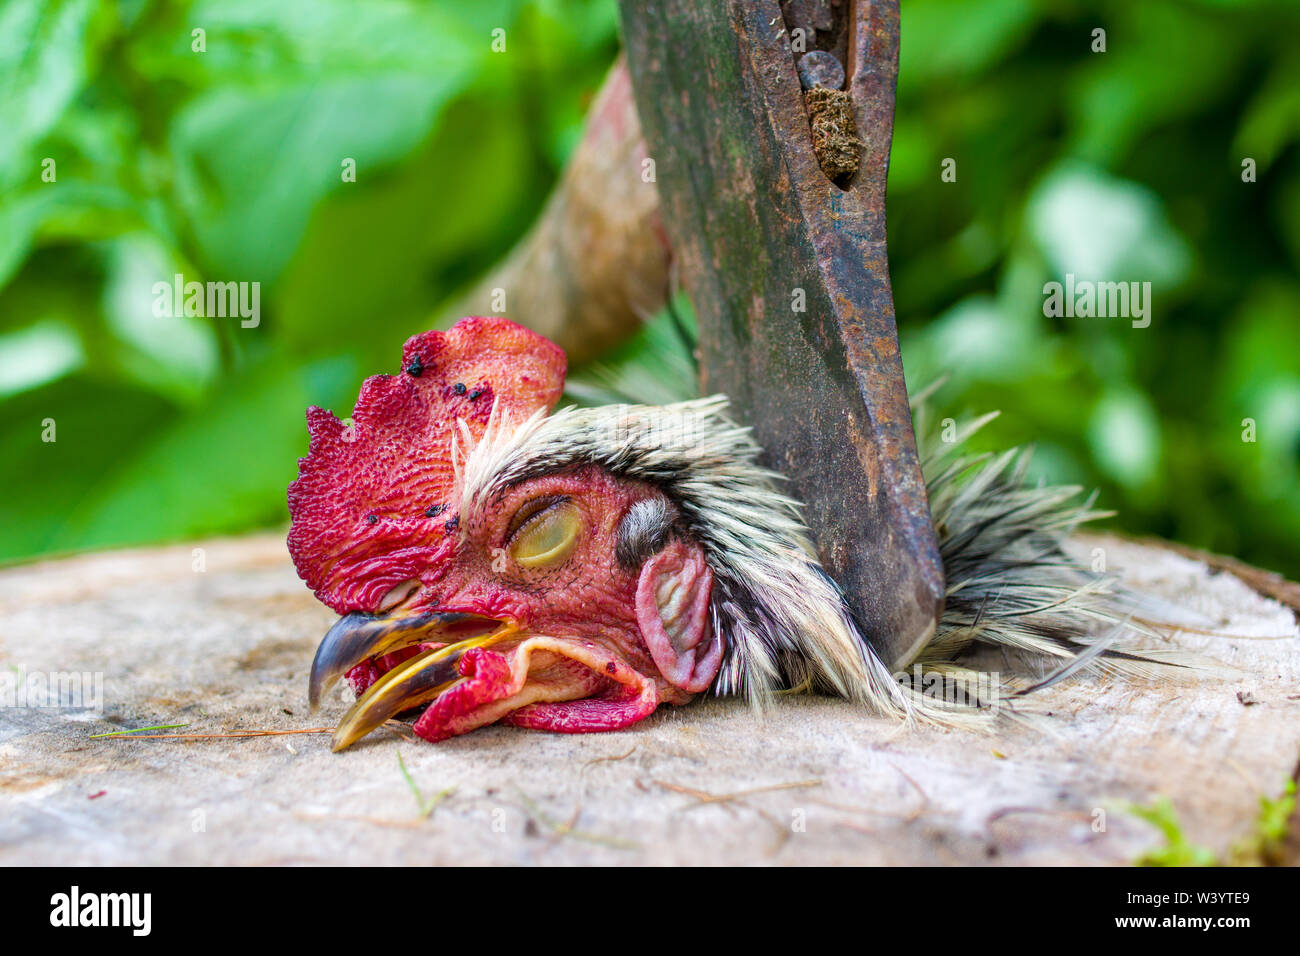 A chicken being slaughtered for meat by having its head chopped off with an axe. Stock Photo